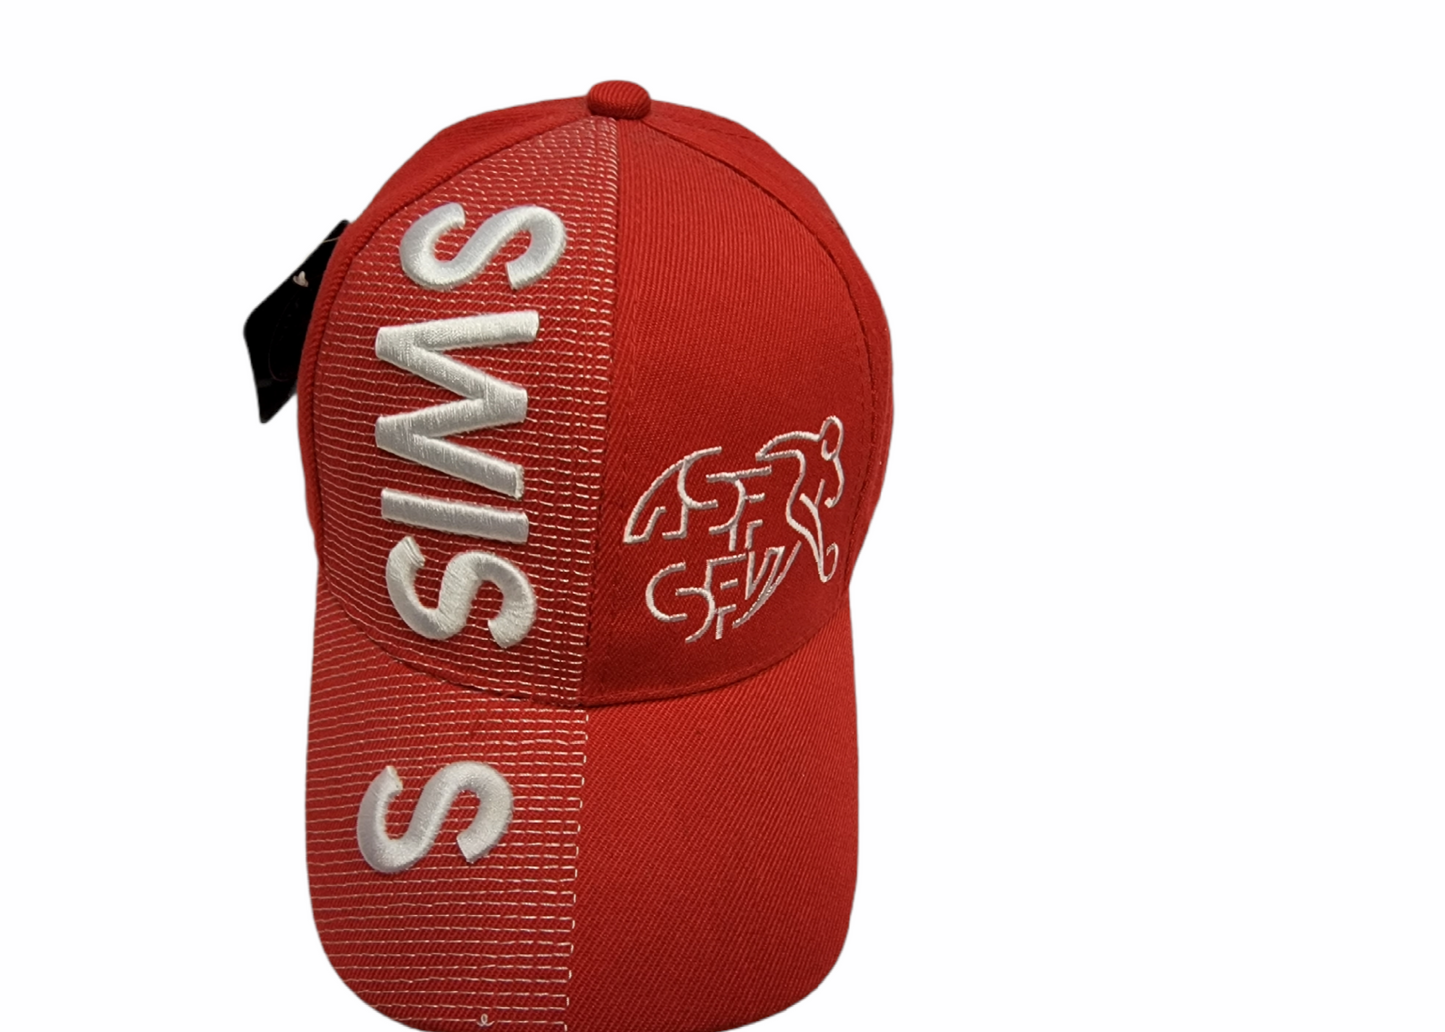 Country Hat 3D Switzerland (Soccer Federation)